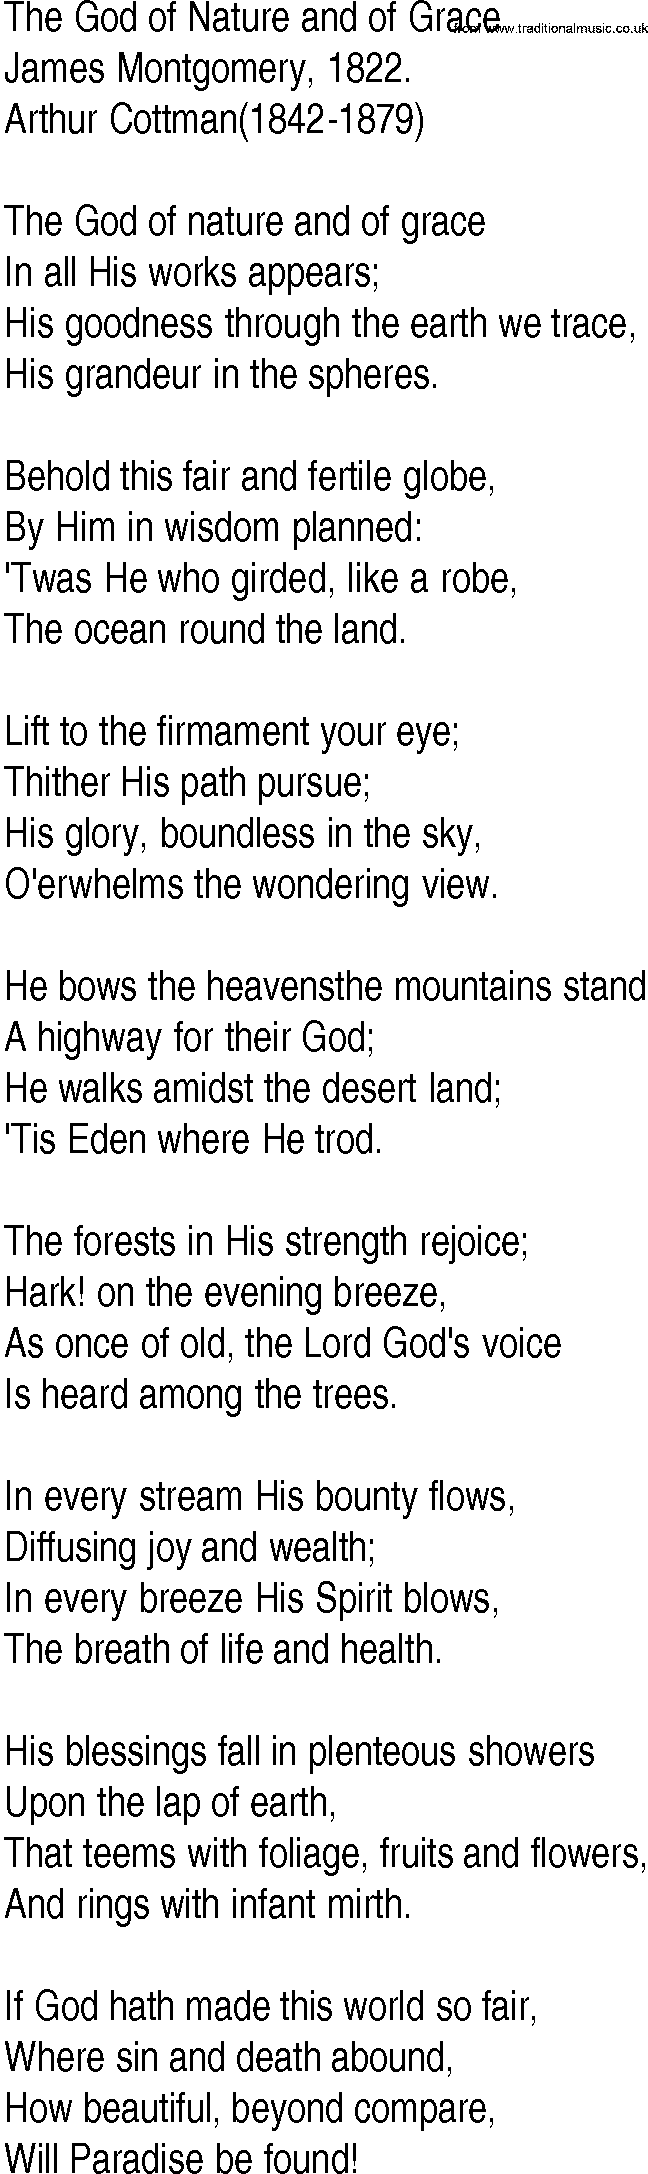 Hymn and Gospel Song: The God of Nature and of Grace by James Montgomery lyrics